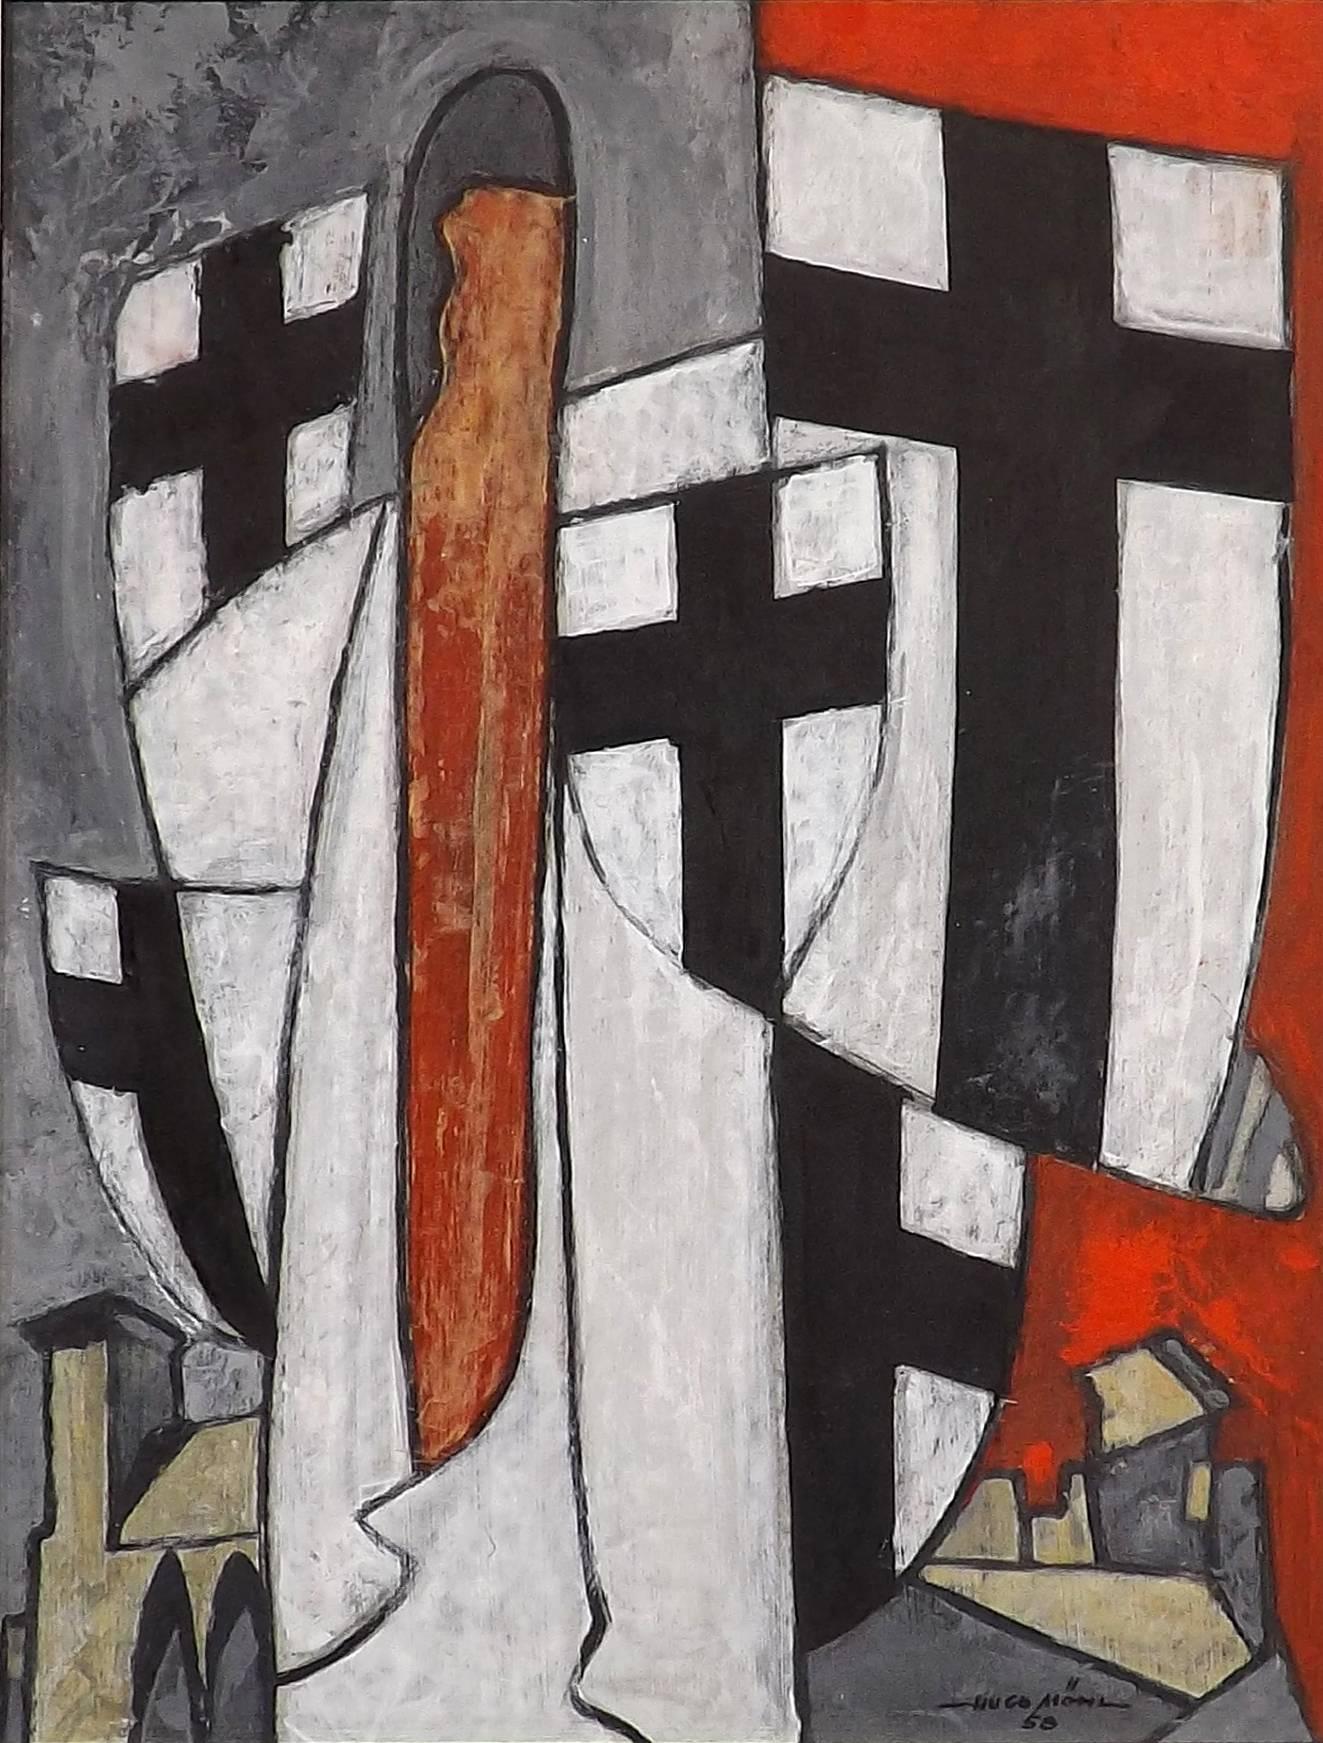 'Ordensritter' tempera on panel dated 1958 by Hugo MöhL. Born in 1893 in Dusseldorf, Germany and graduated from the Academy of Fine Arts in Berlin. Began his proffessional career as a traditional representational artist. Hugo received high acclaim